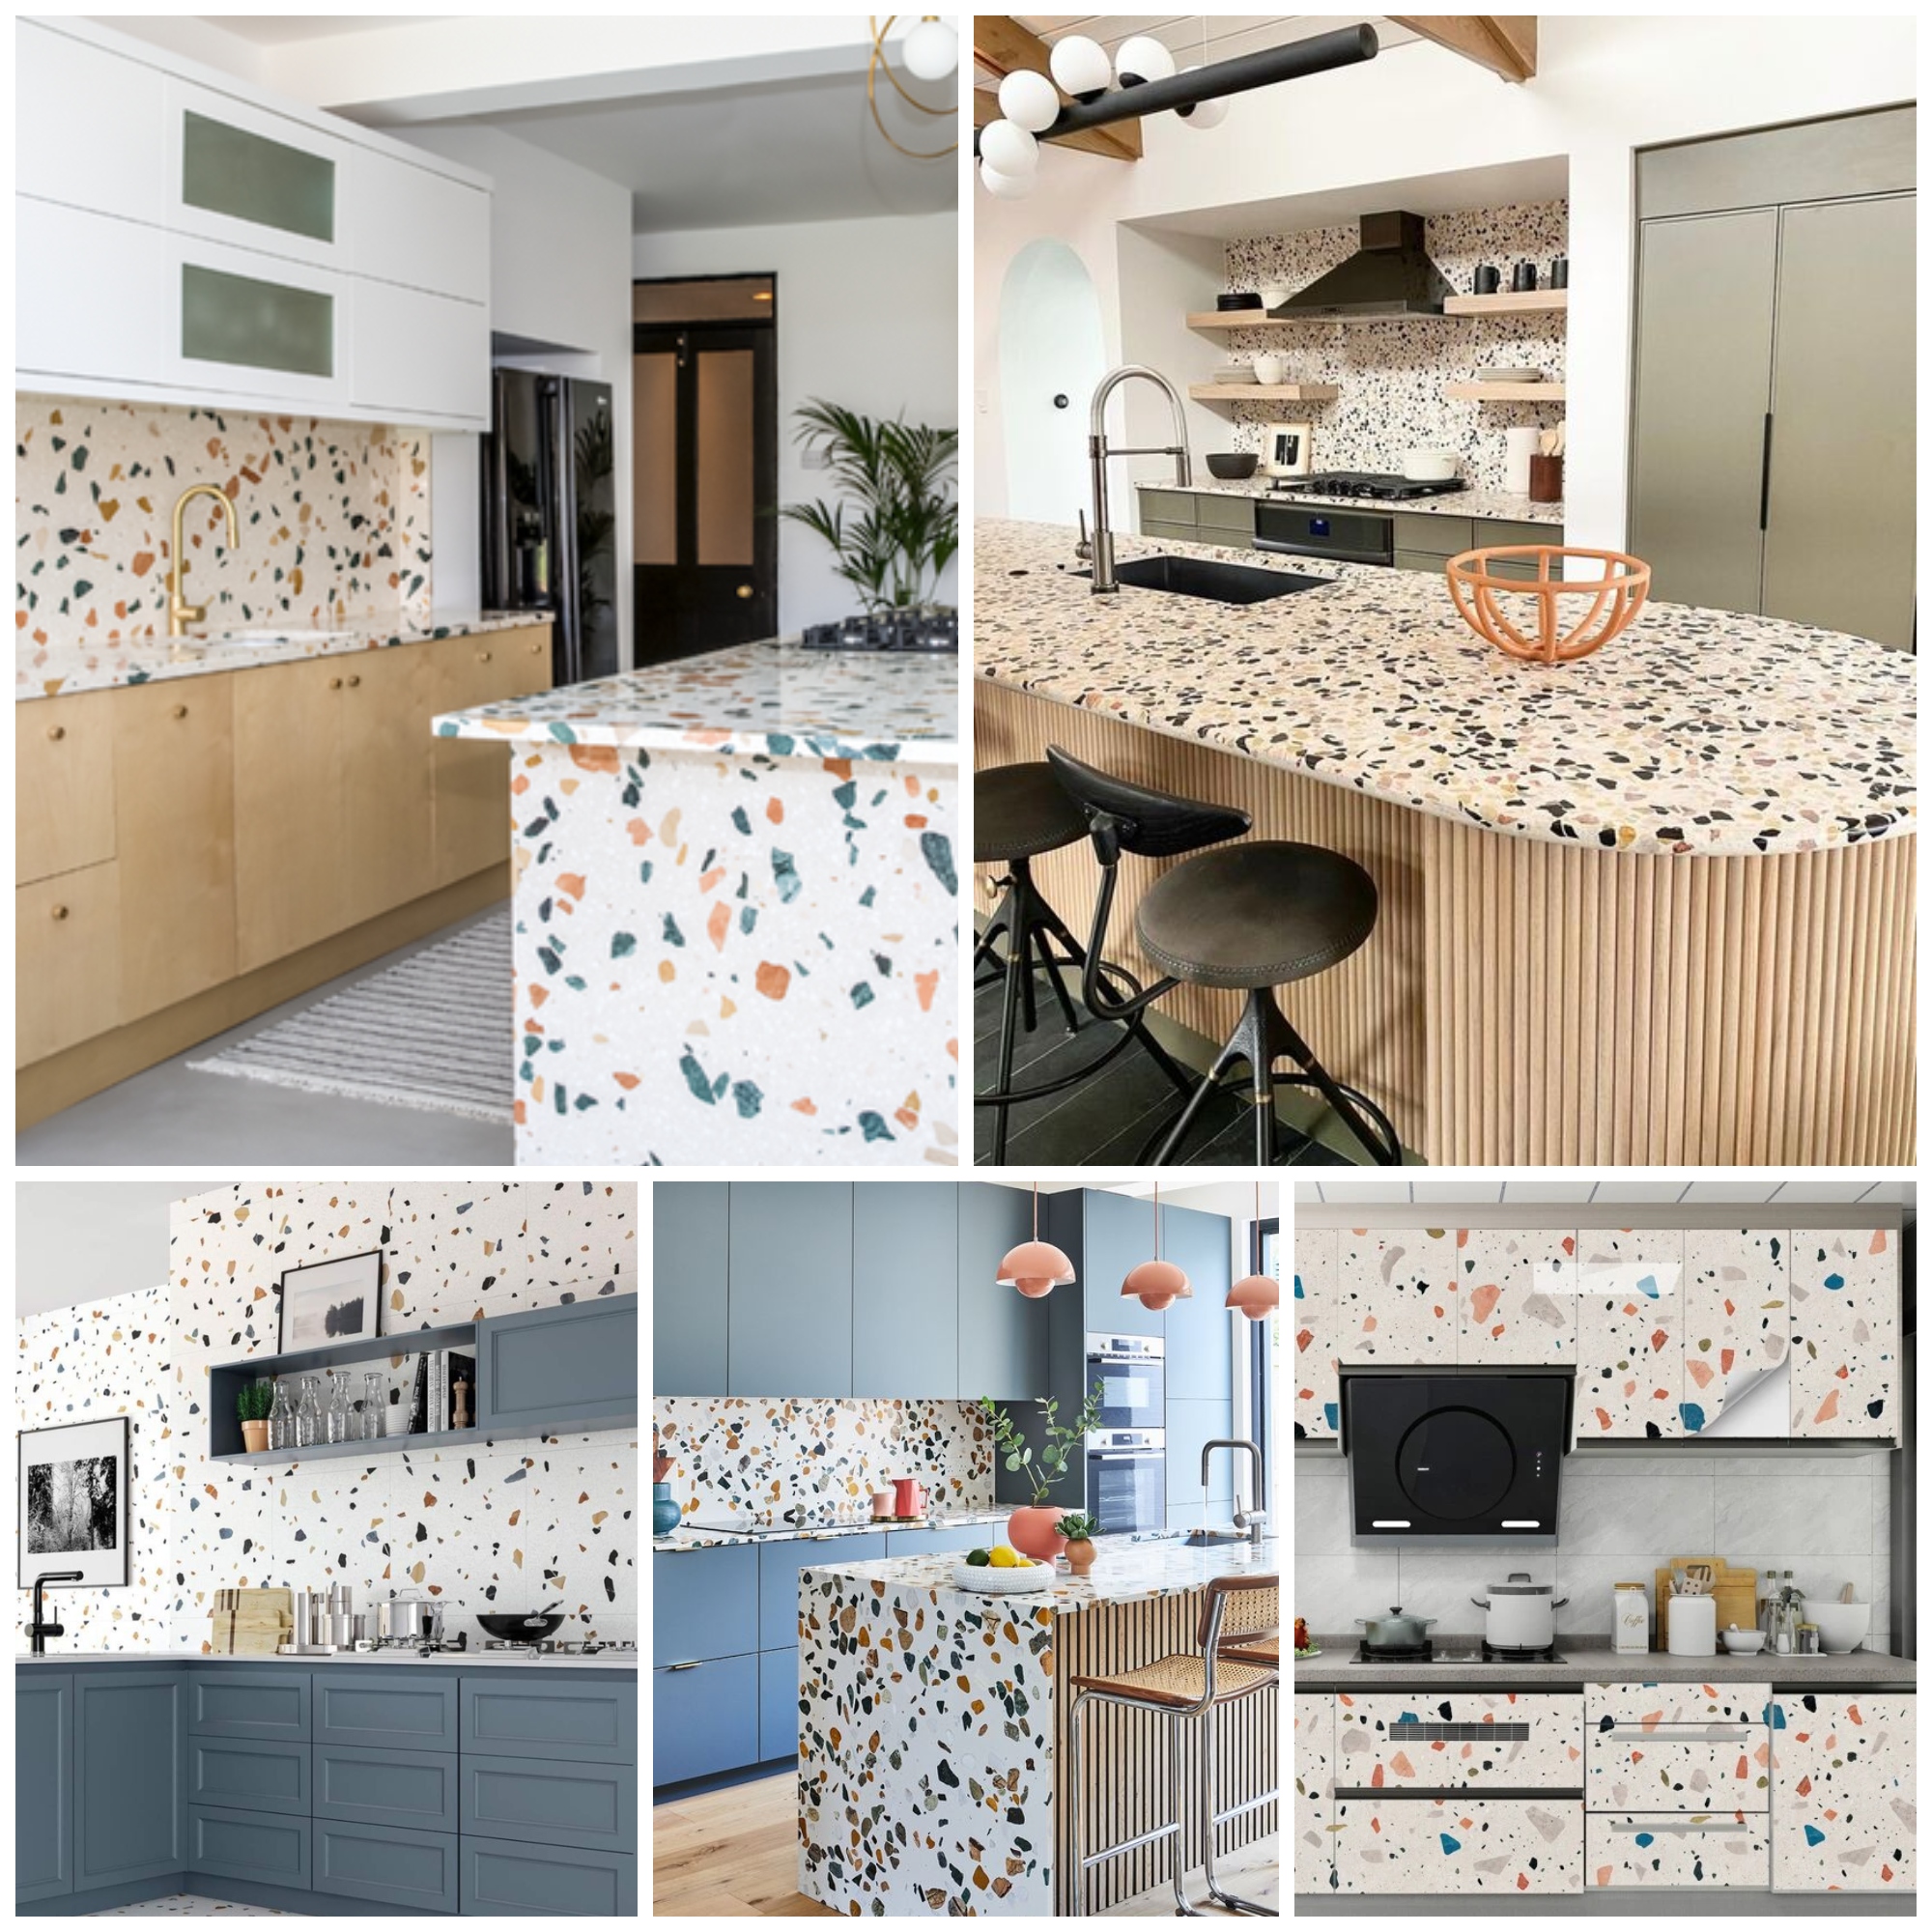 Inspiring kitchens with a terrazzo countertop